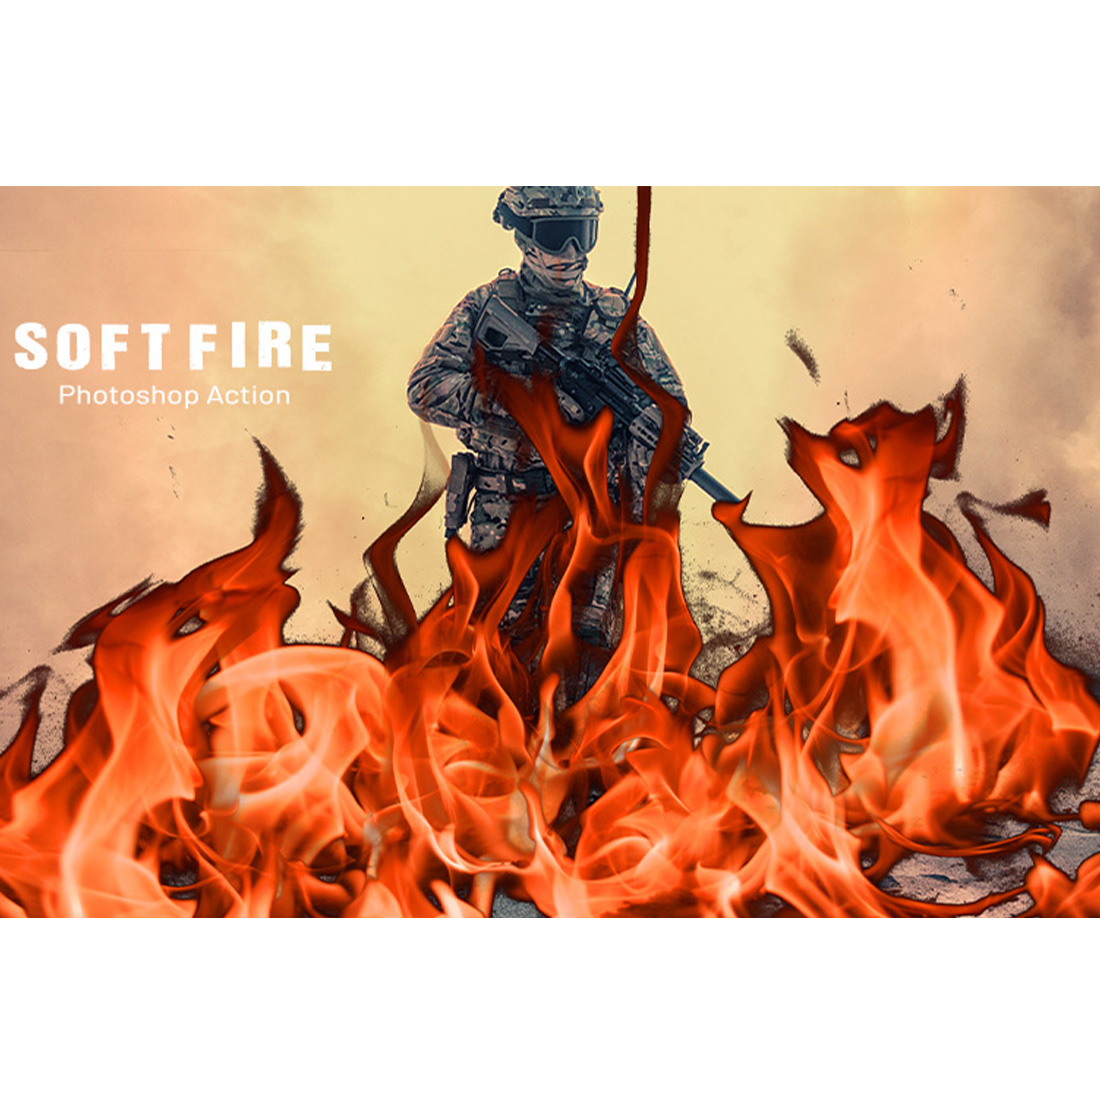 Soft fire Photoshop Action cover image.